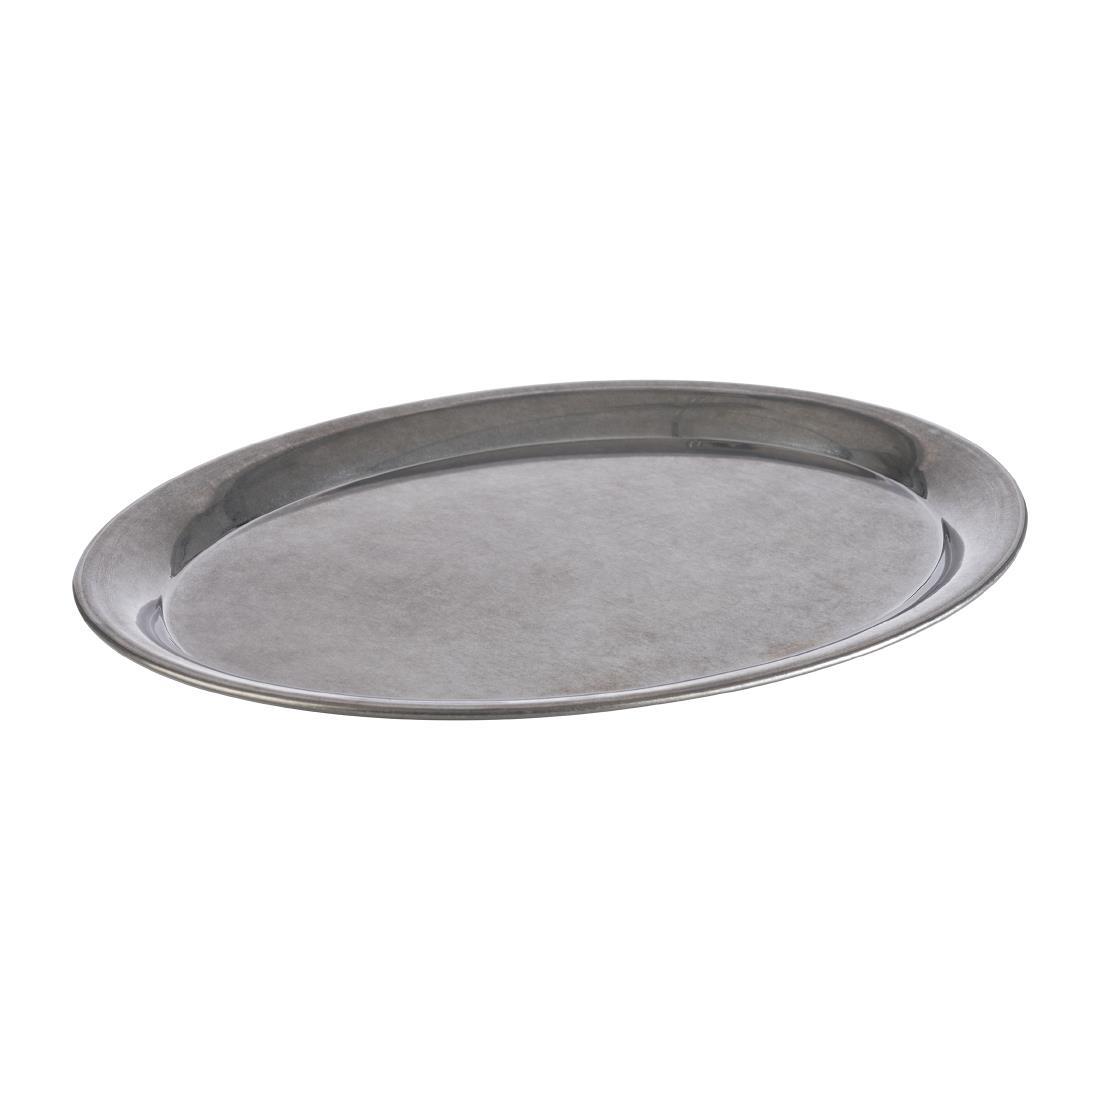 APS Coffeehouse Vintage Tray 290 x 220mm - FT173  - 1